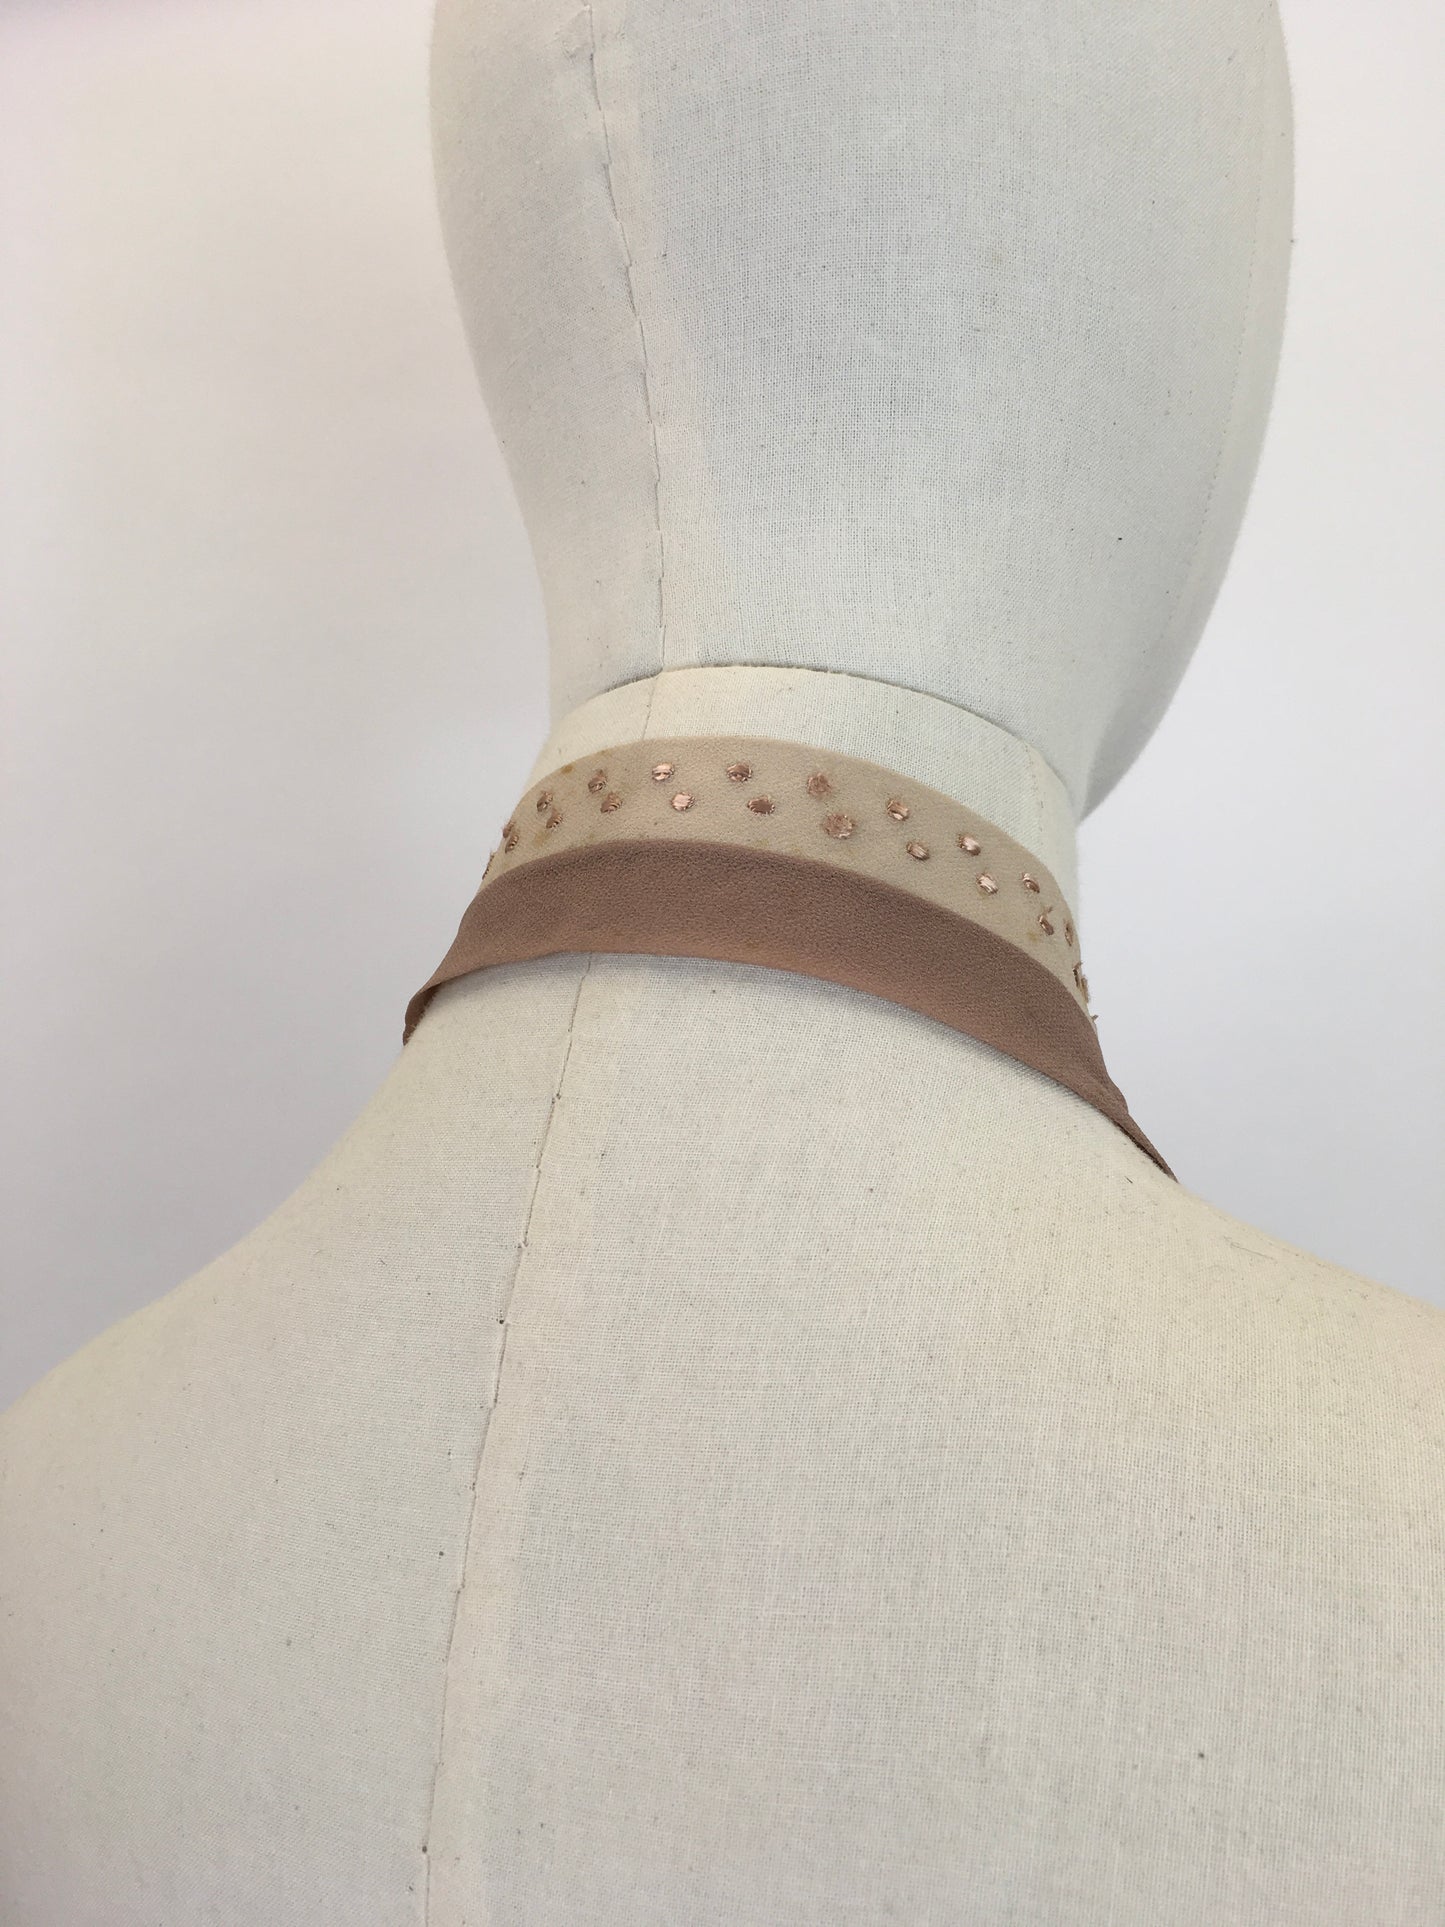 Vintage 1930's Darling Double Chiffon Collar - In Soft Fawn & Cream With Embroidery